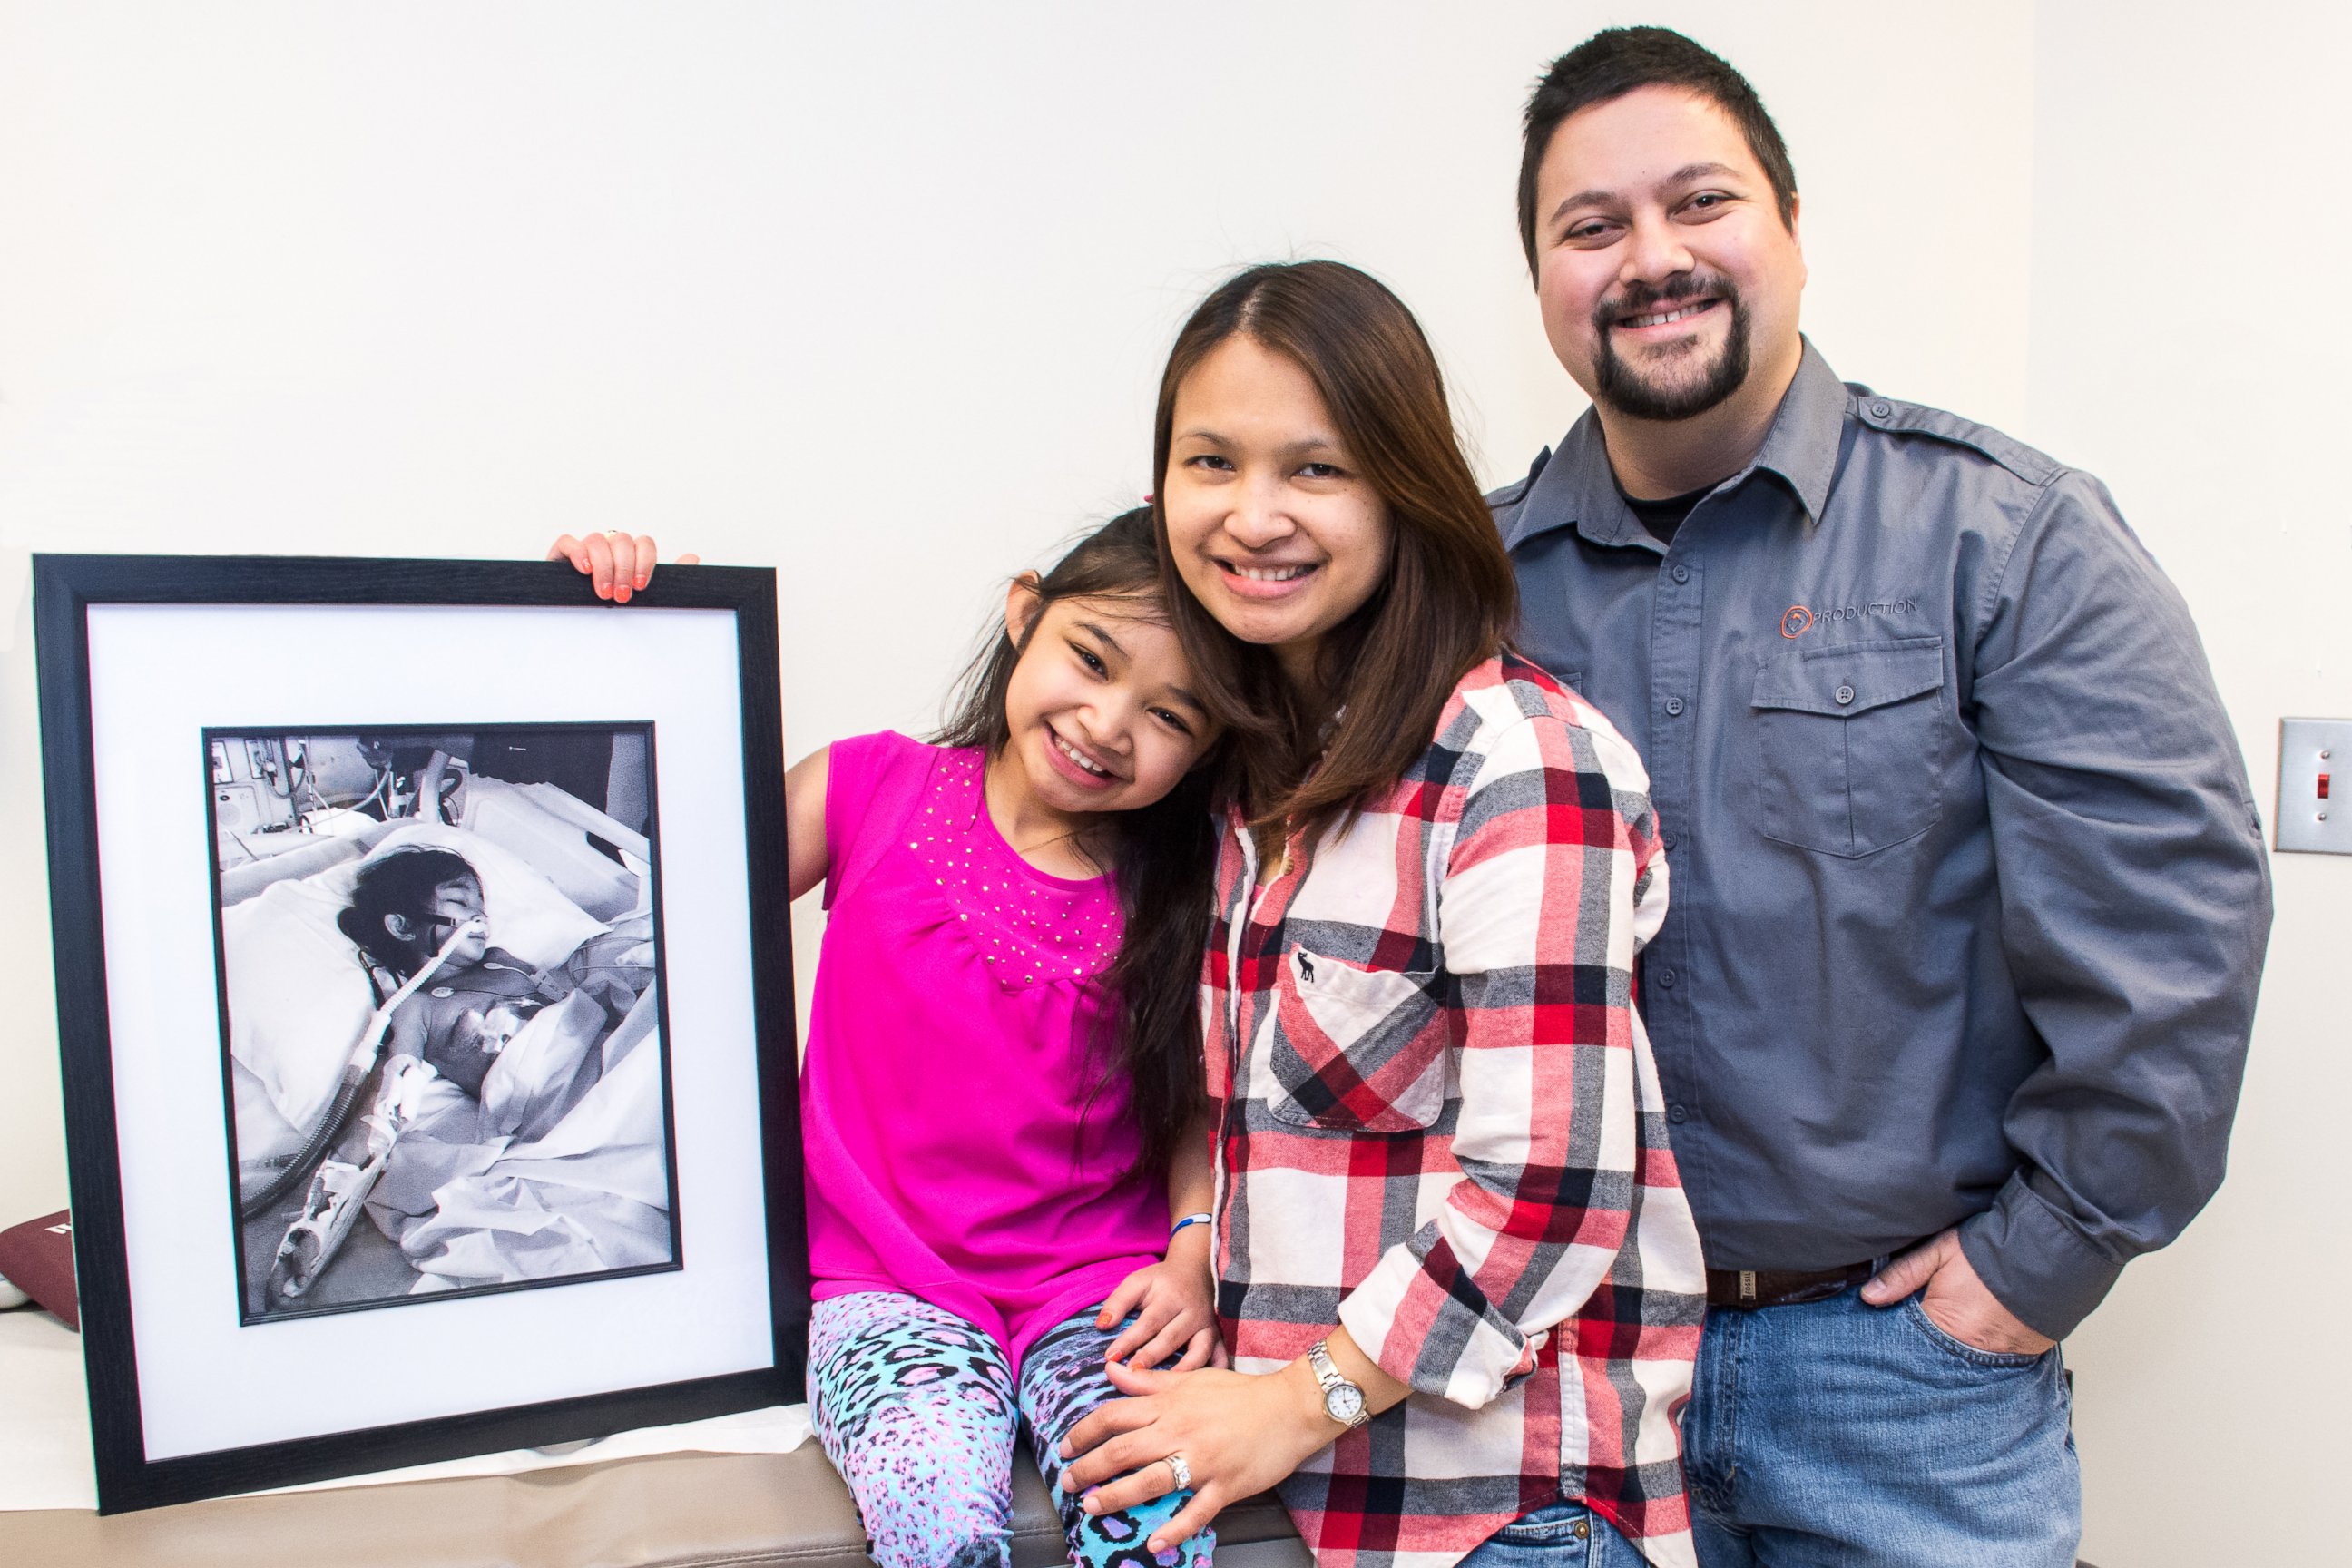 PHOTO: Angelica, a kidney recipient, is pictured with family in an undated photo.